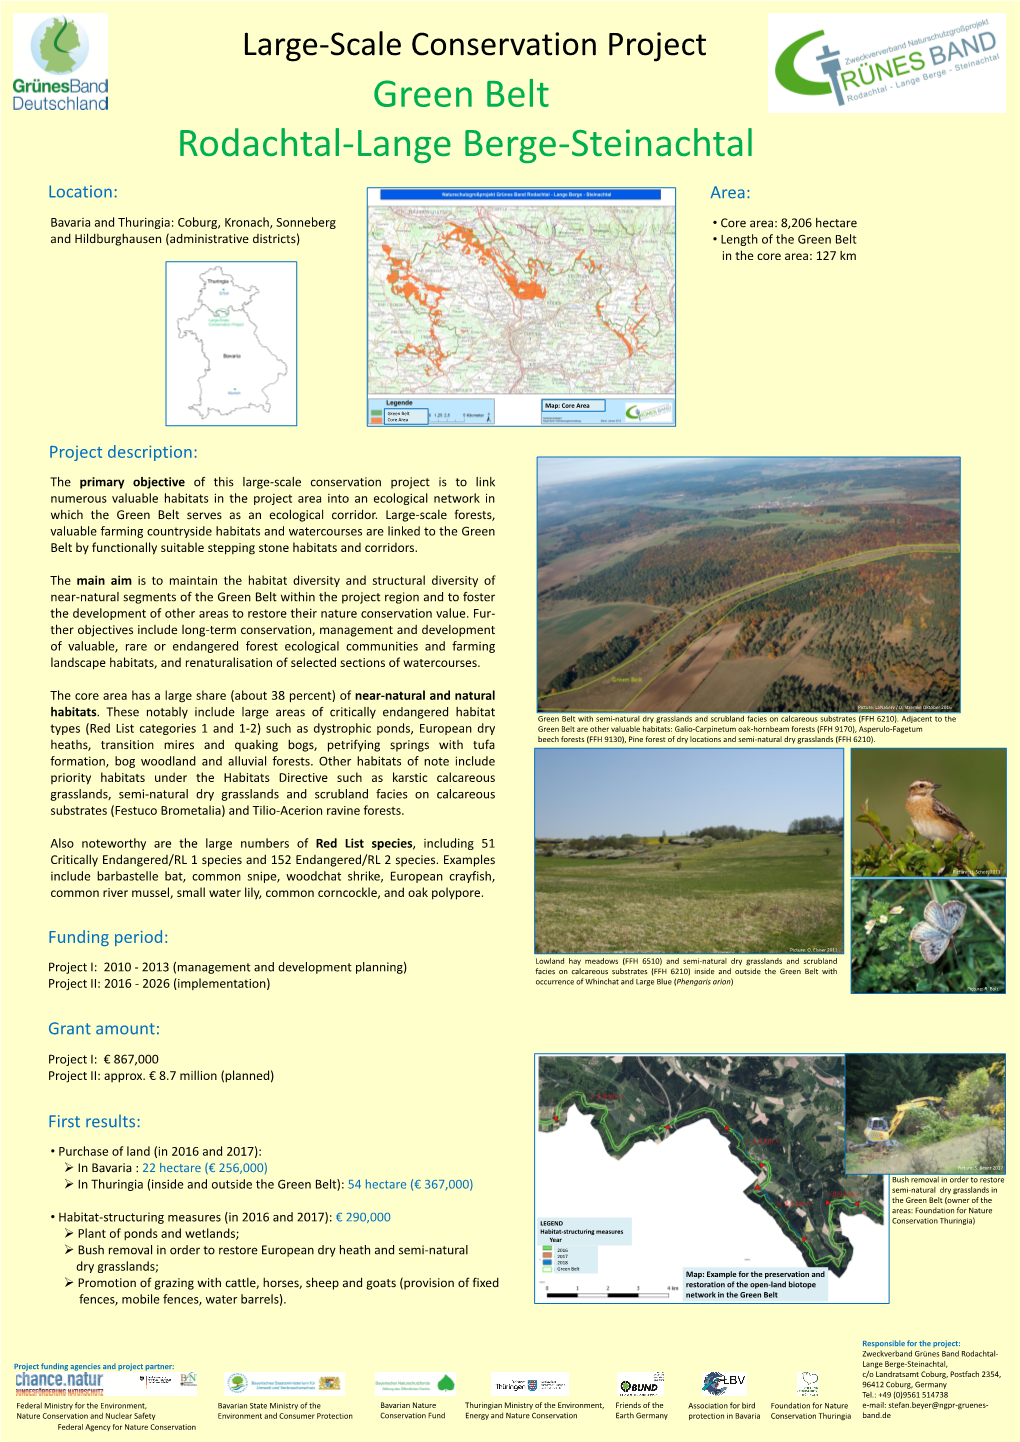 Large-Scale Conservation Project, Green Belt